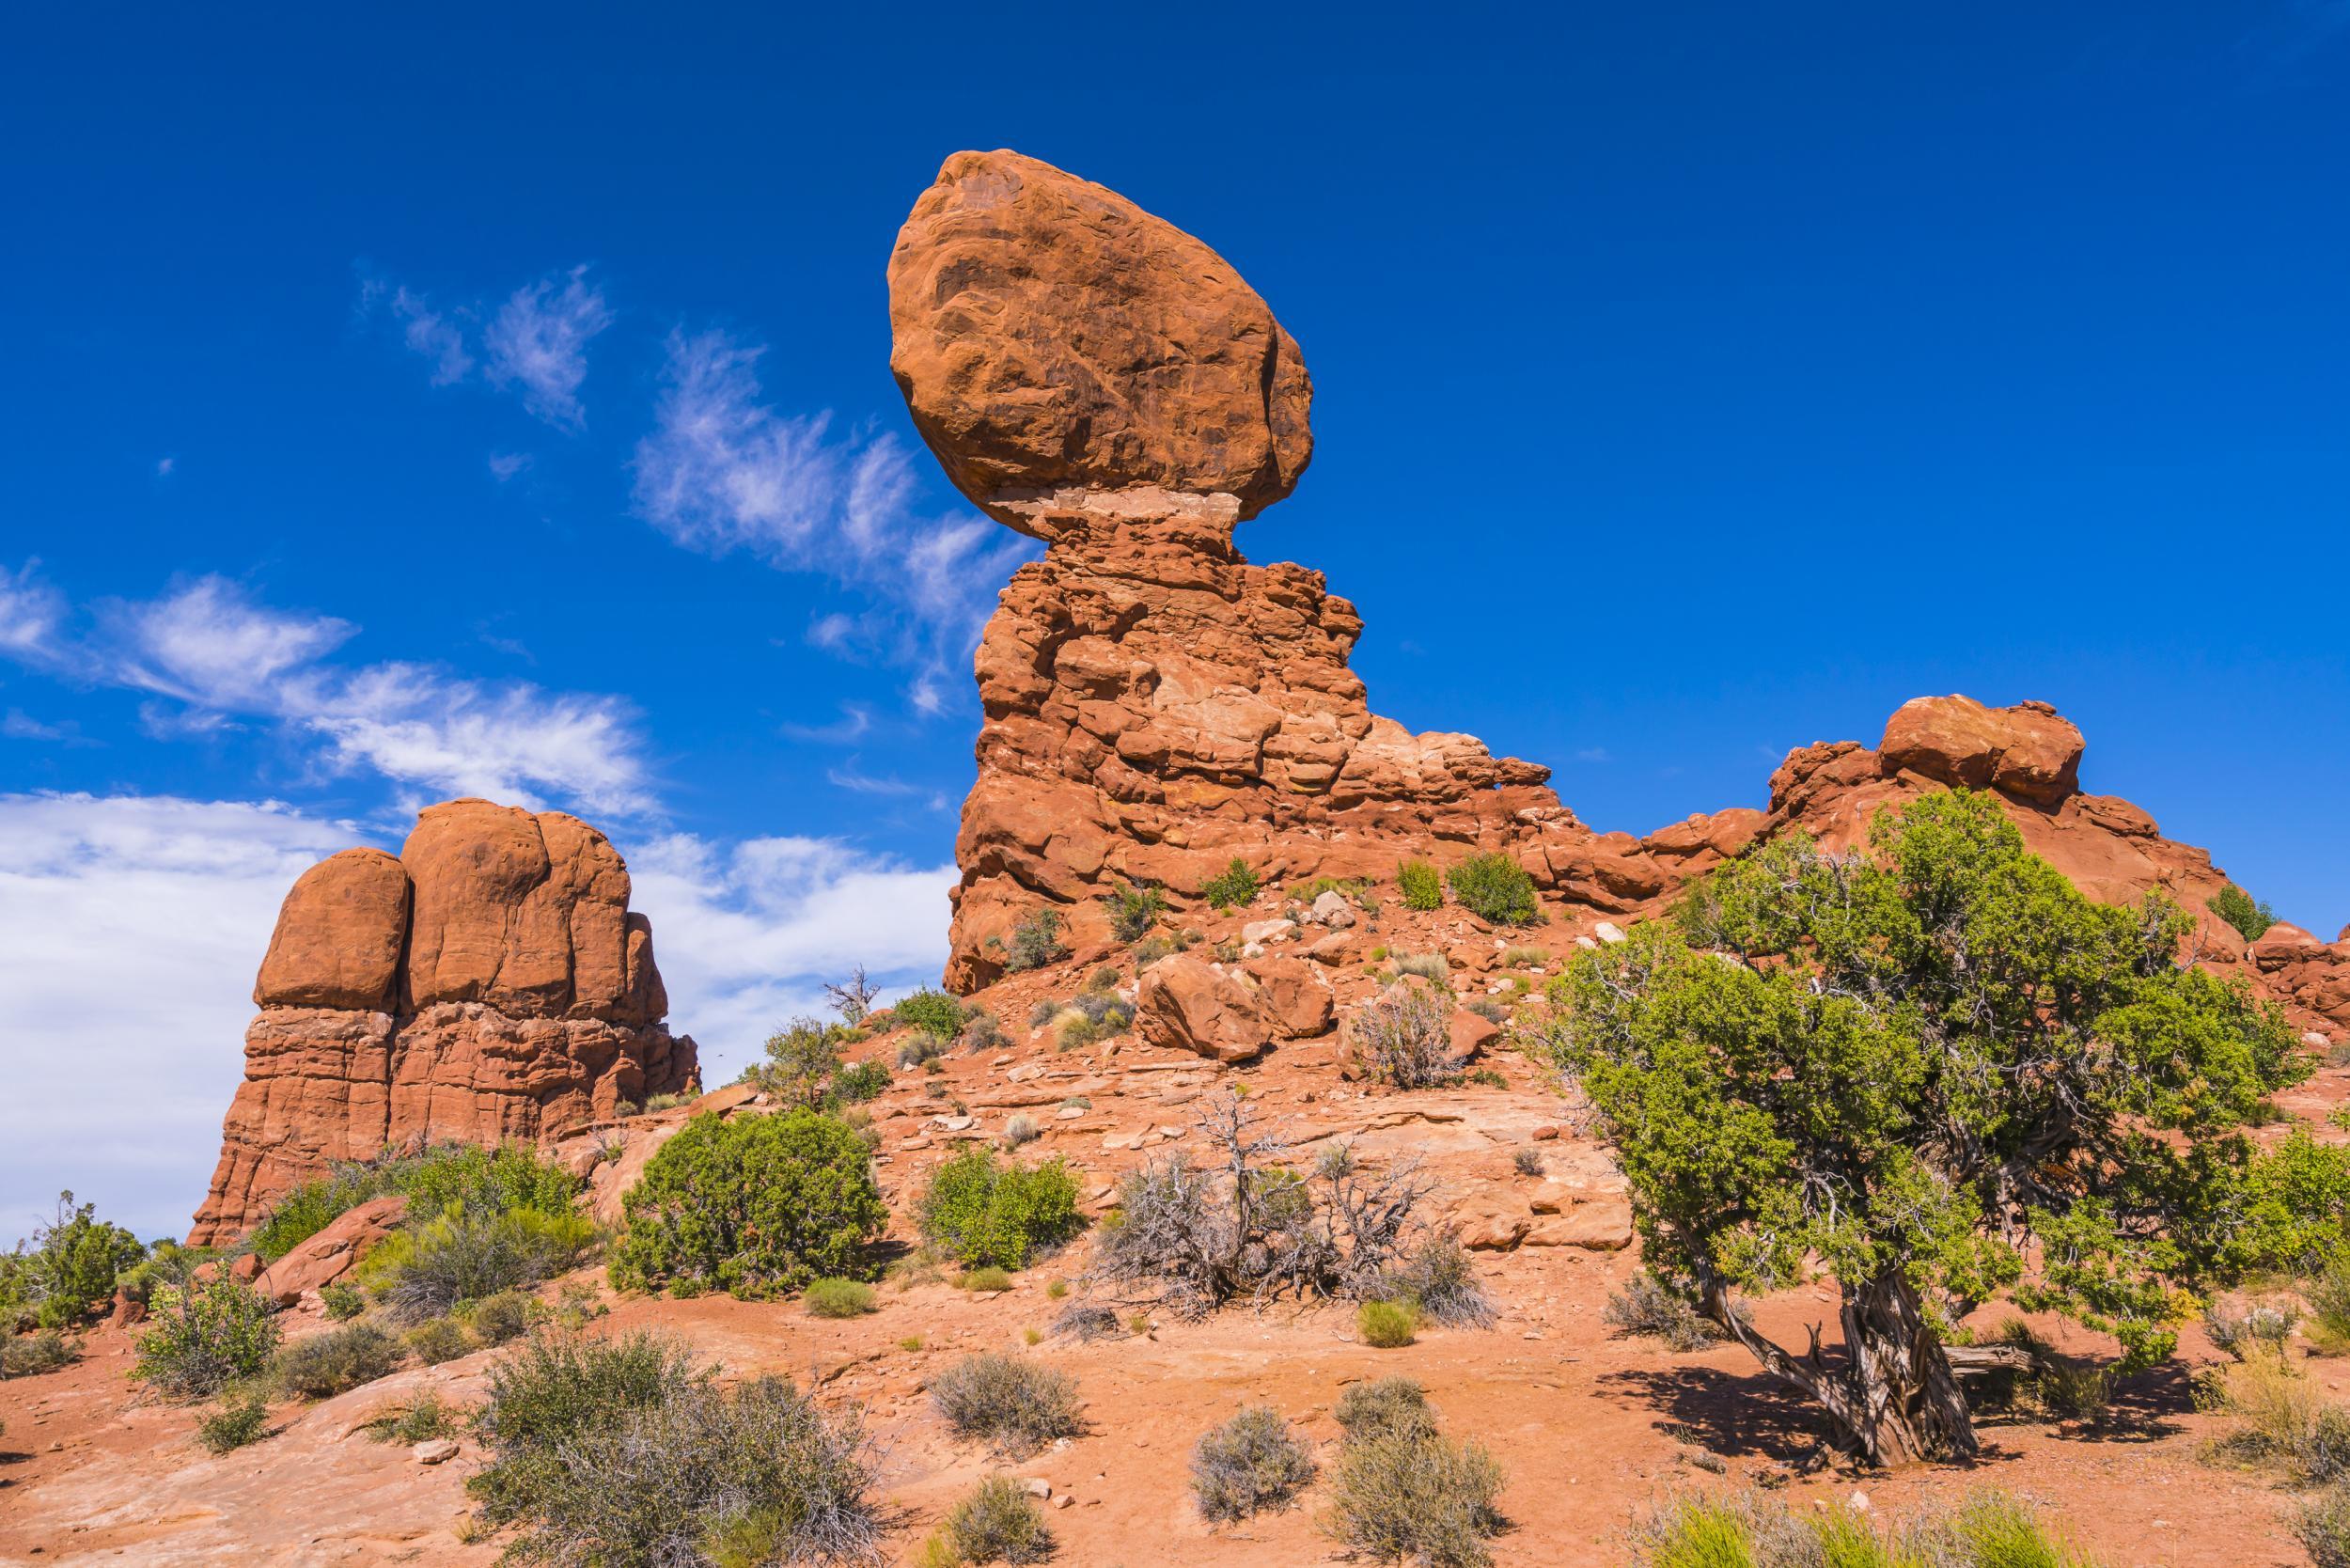 The precarious-looking Balanced Rock, a much-visited site in Arches National Park